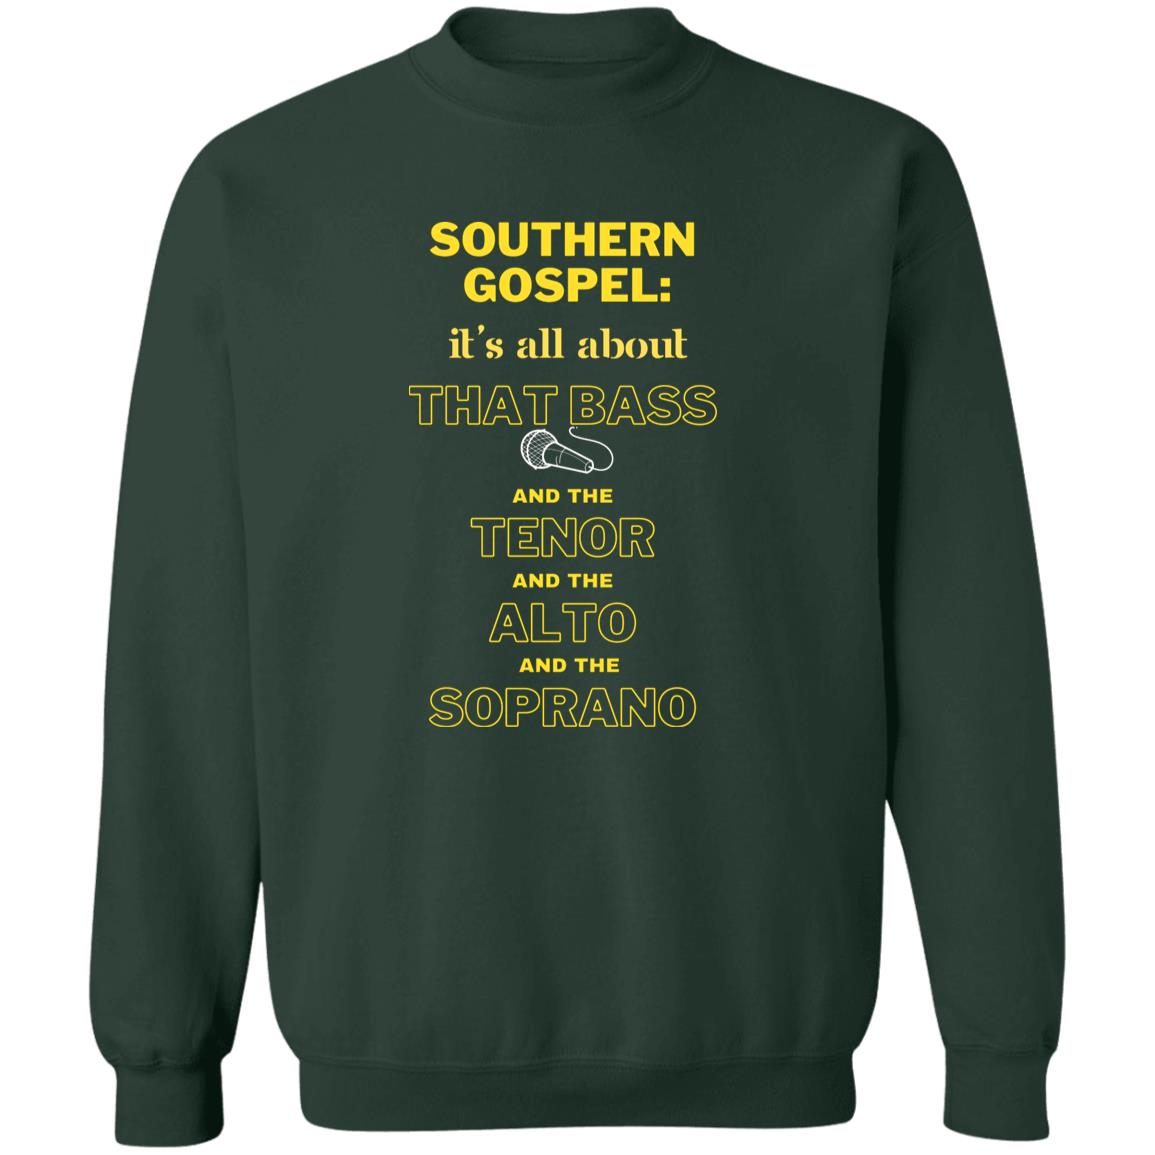 Southern Gospel: It's All About That Bass - Mixed Group Sweatshirt